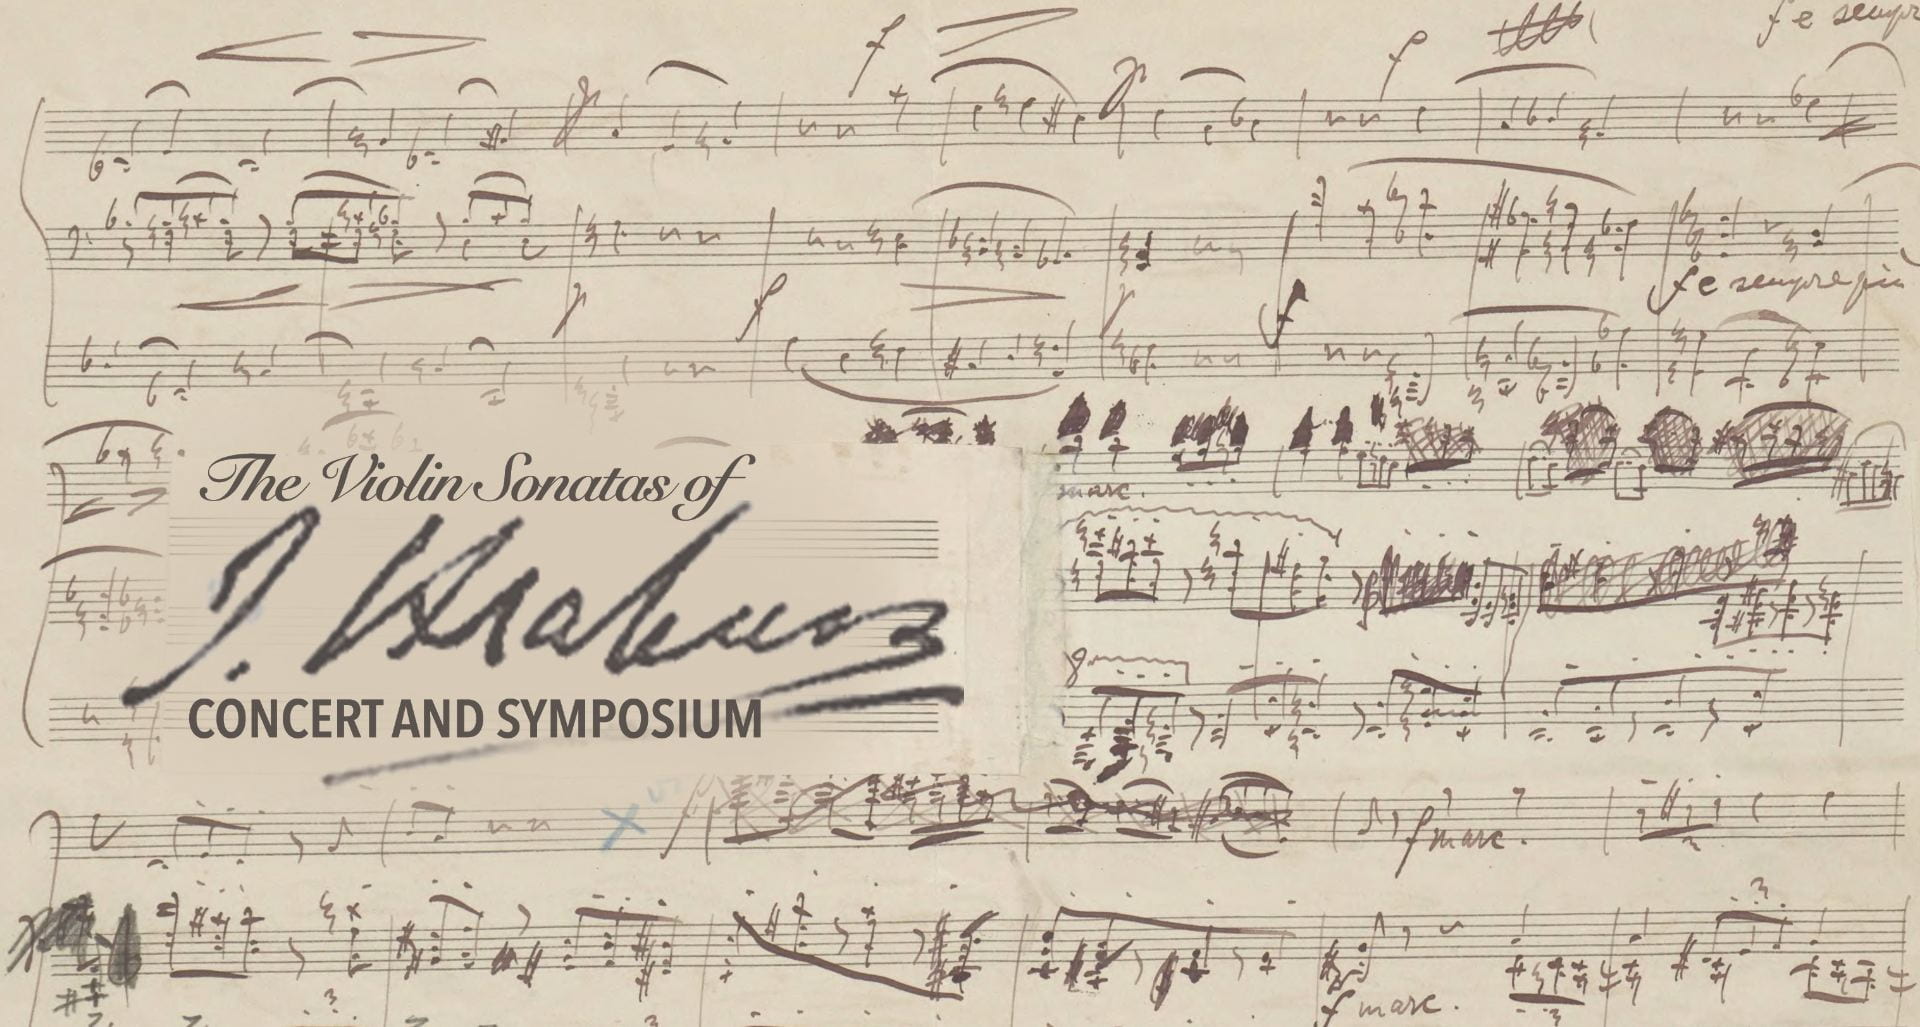 A scan of Brahms hand-written score with the title of the event superimposed: The Violin Sonatas of Brahms, Concert and Symposium.